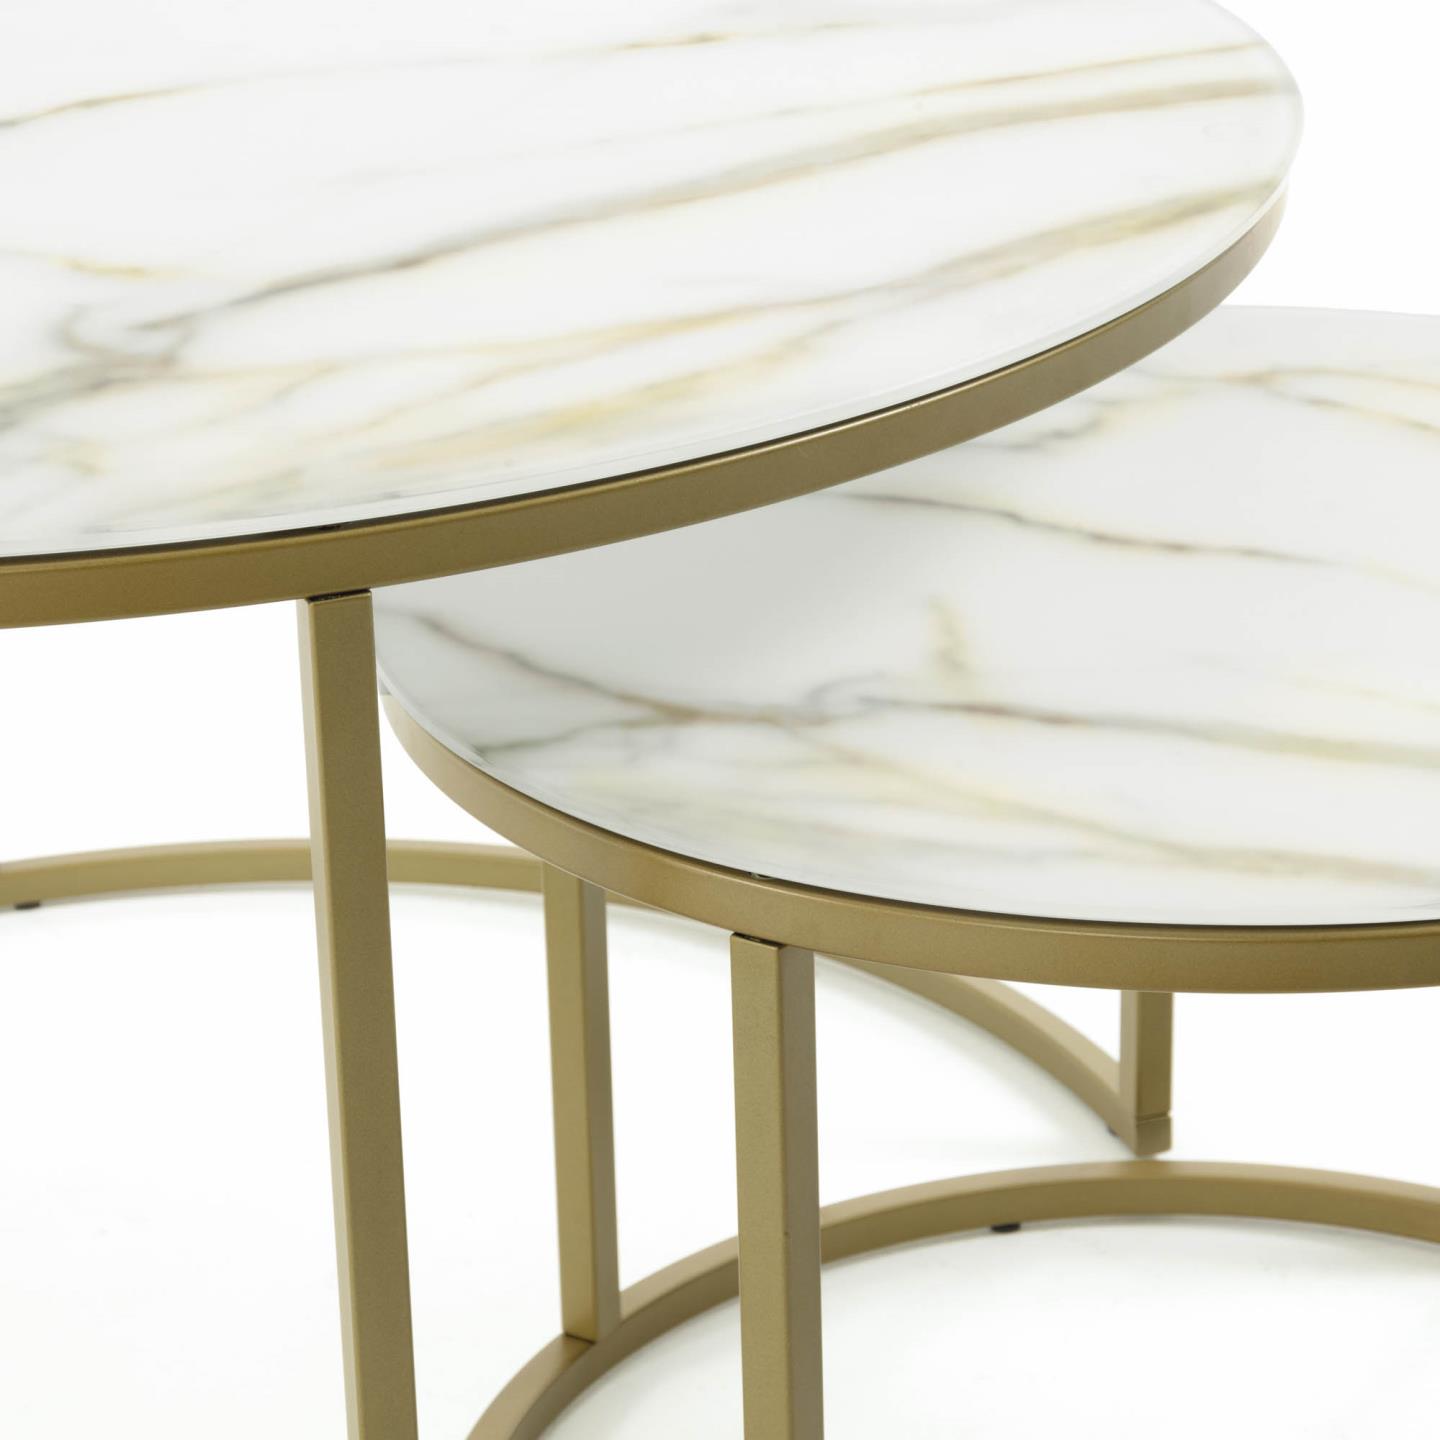 Set of 2 Leonor glass side tables in white and golden steel structure Ø 80 cm / Ø 50 cm